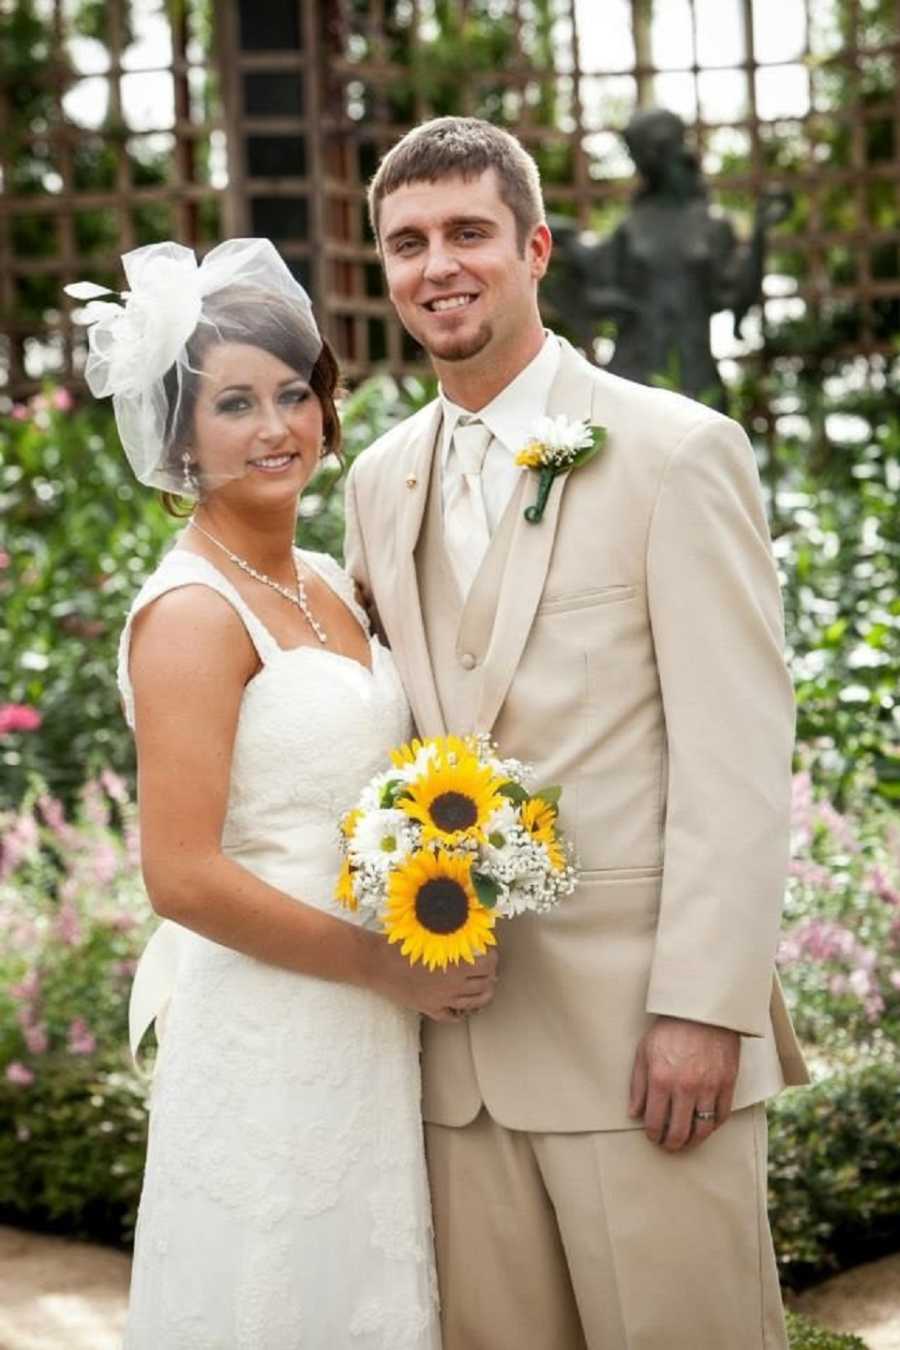 Bride stands holding bouquet of sunflowers outside beside groom